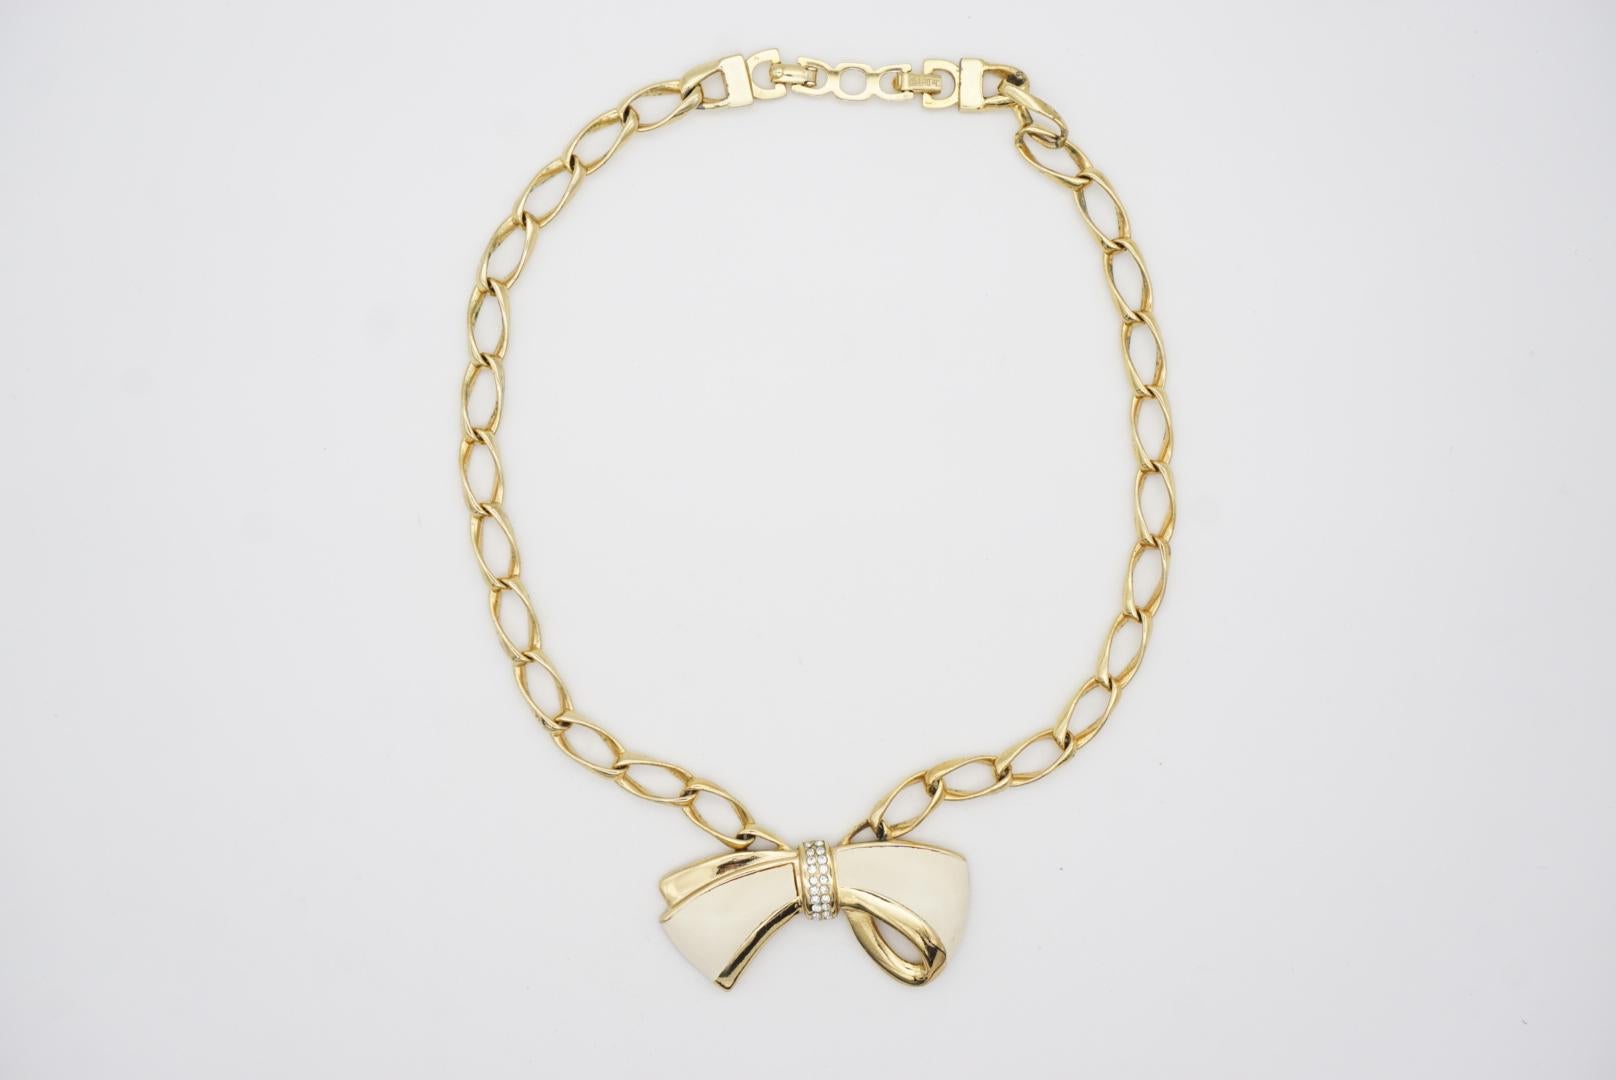 Christian Dior Vintage 1980s Beige Knot Bow Crystal Gold Chunky Choker Necklace  For Sale 1